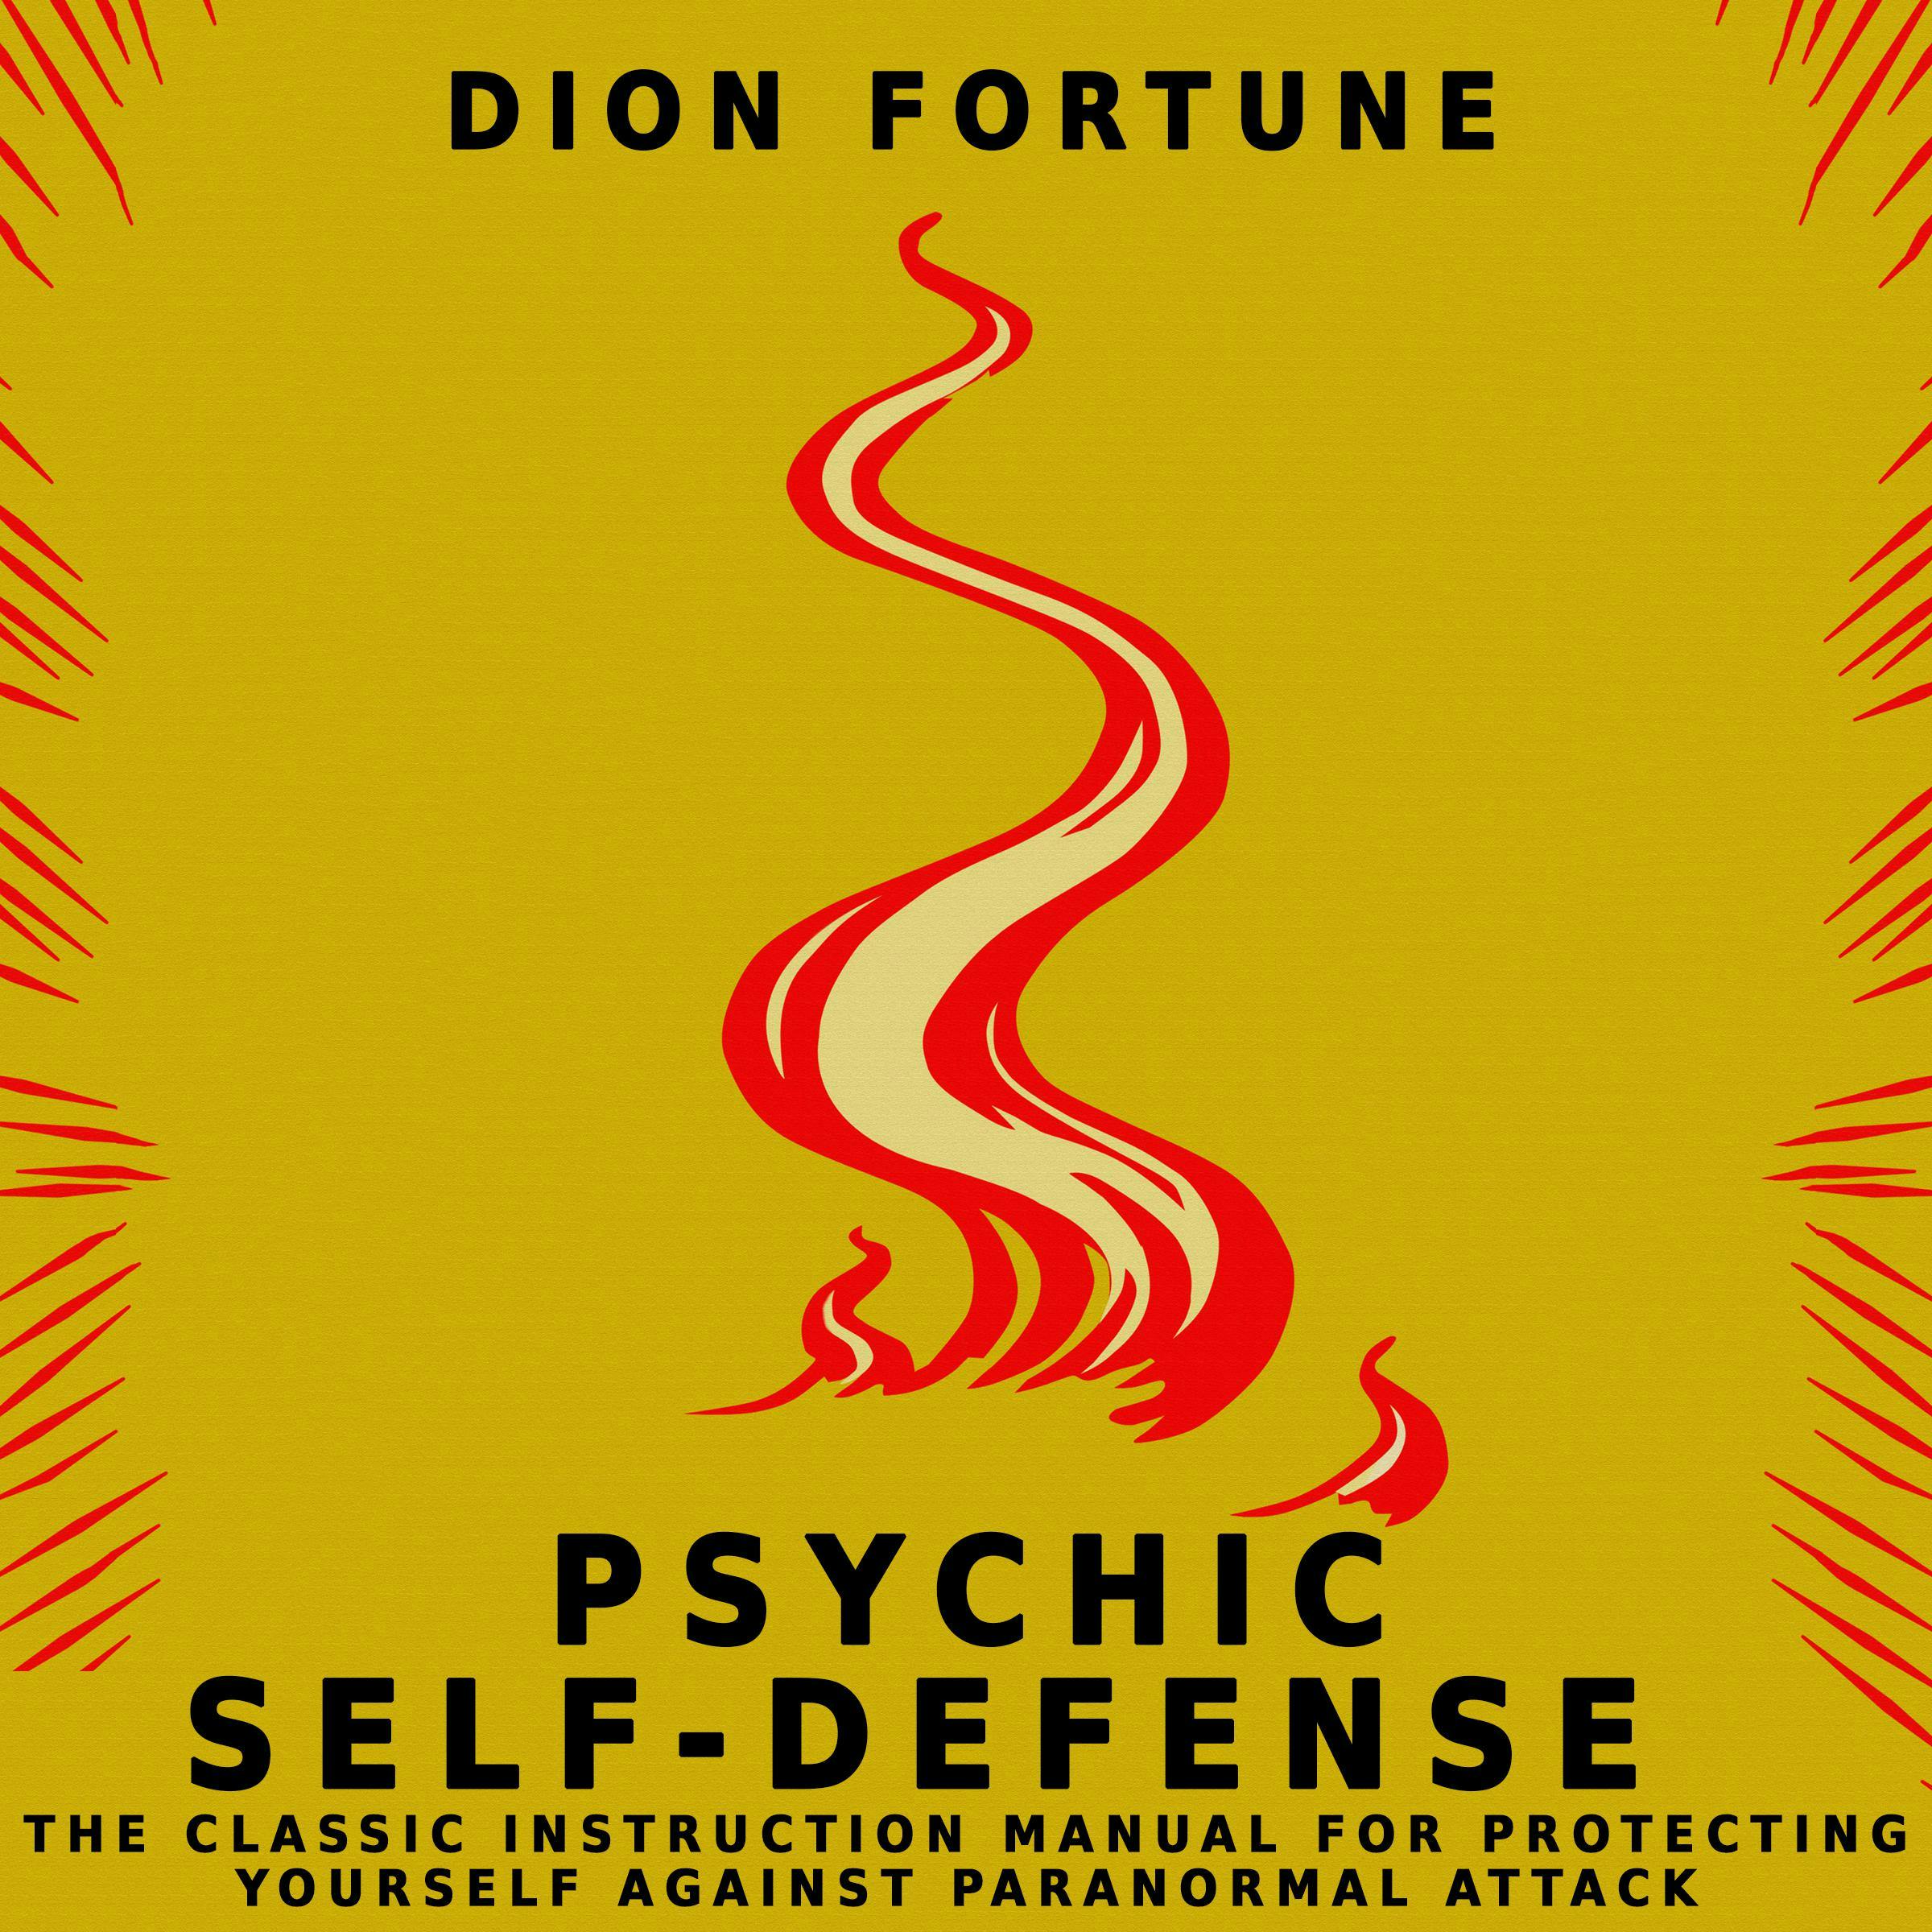 PSYCHIC SELF-DEFENSE - undefined